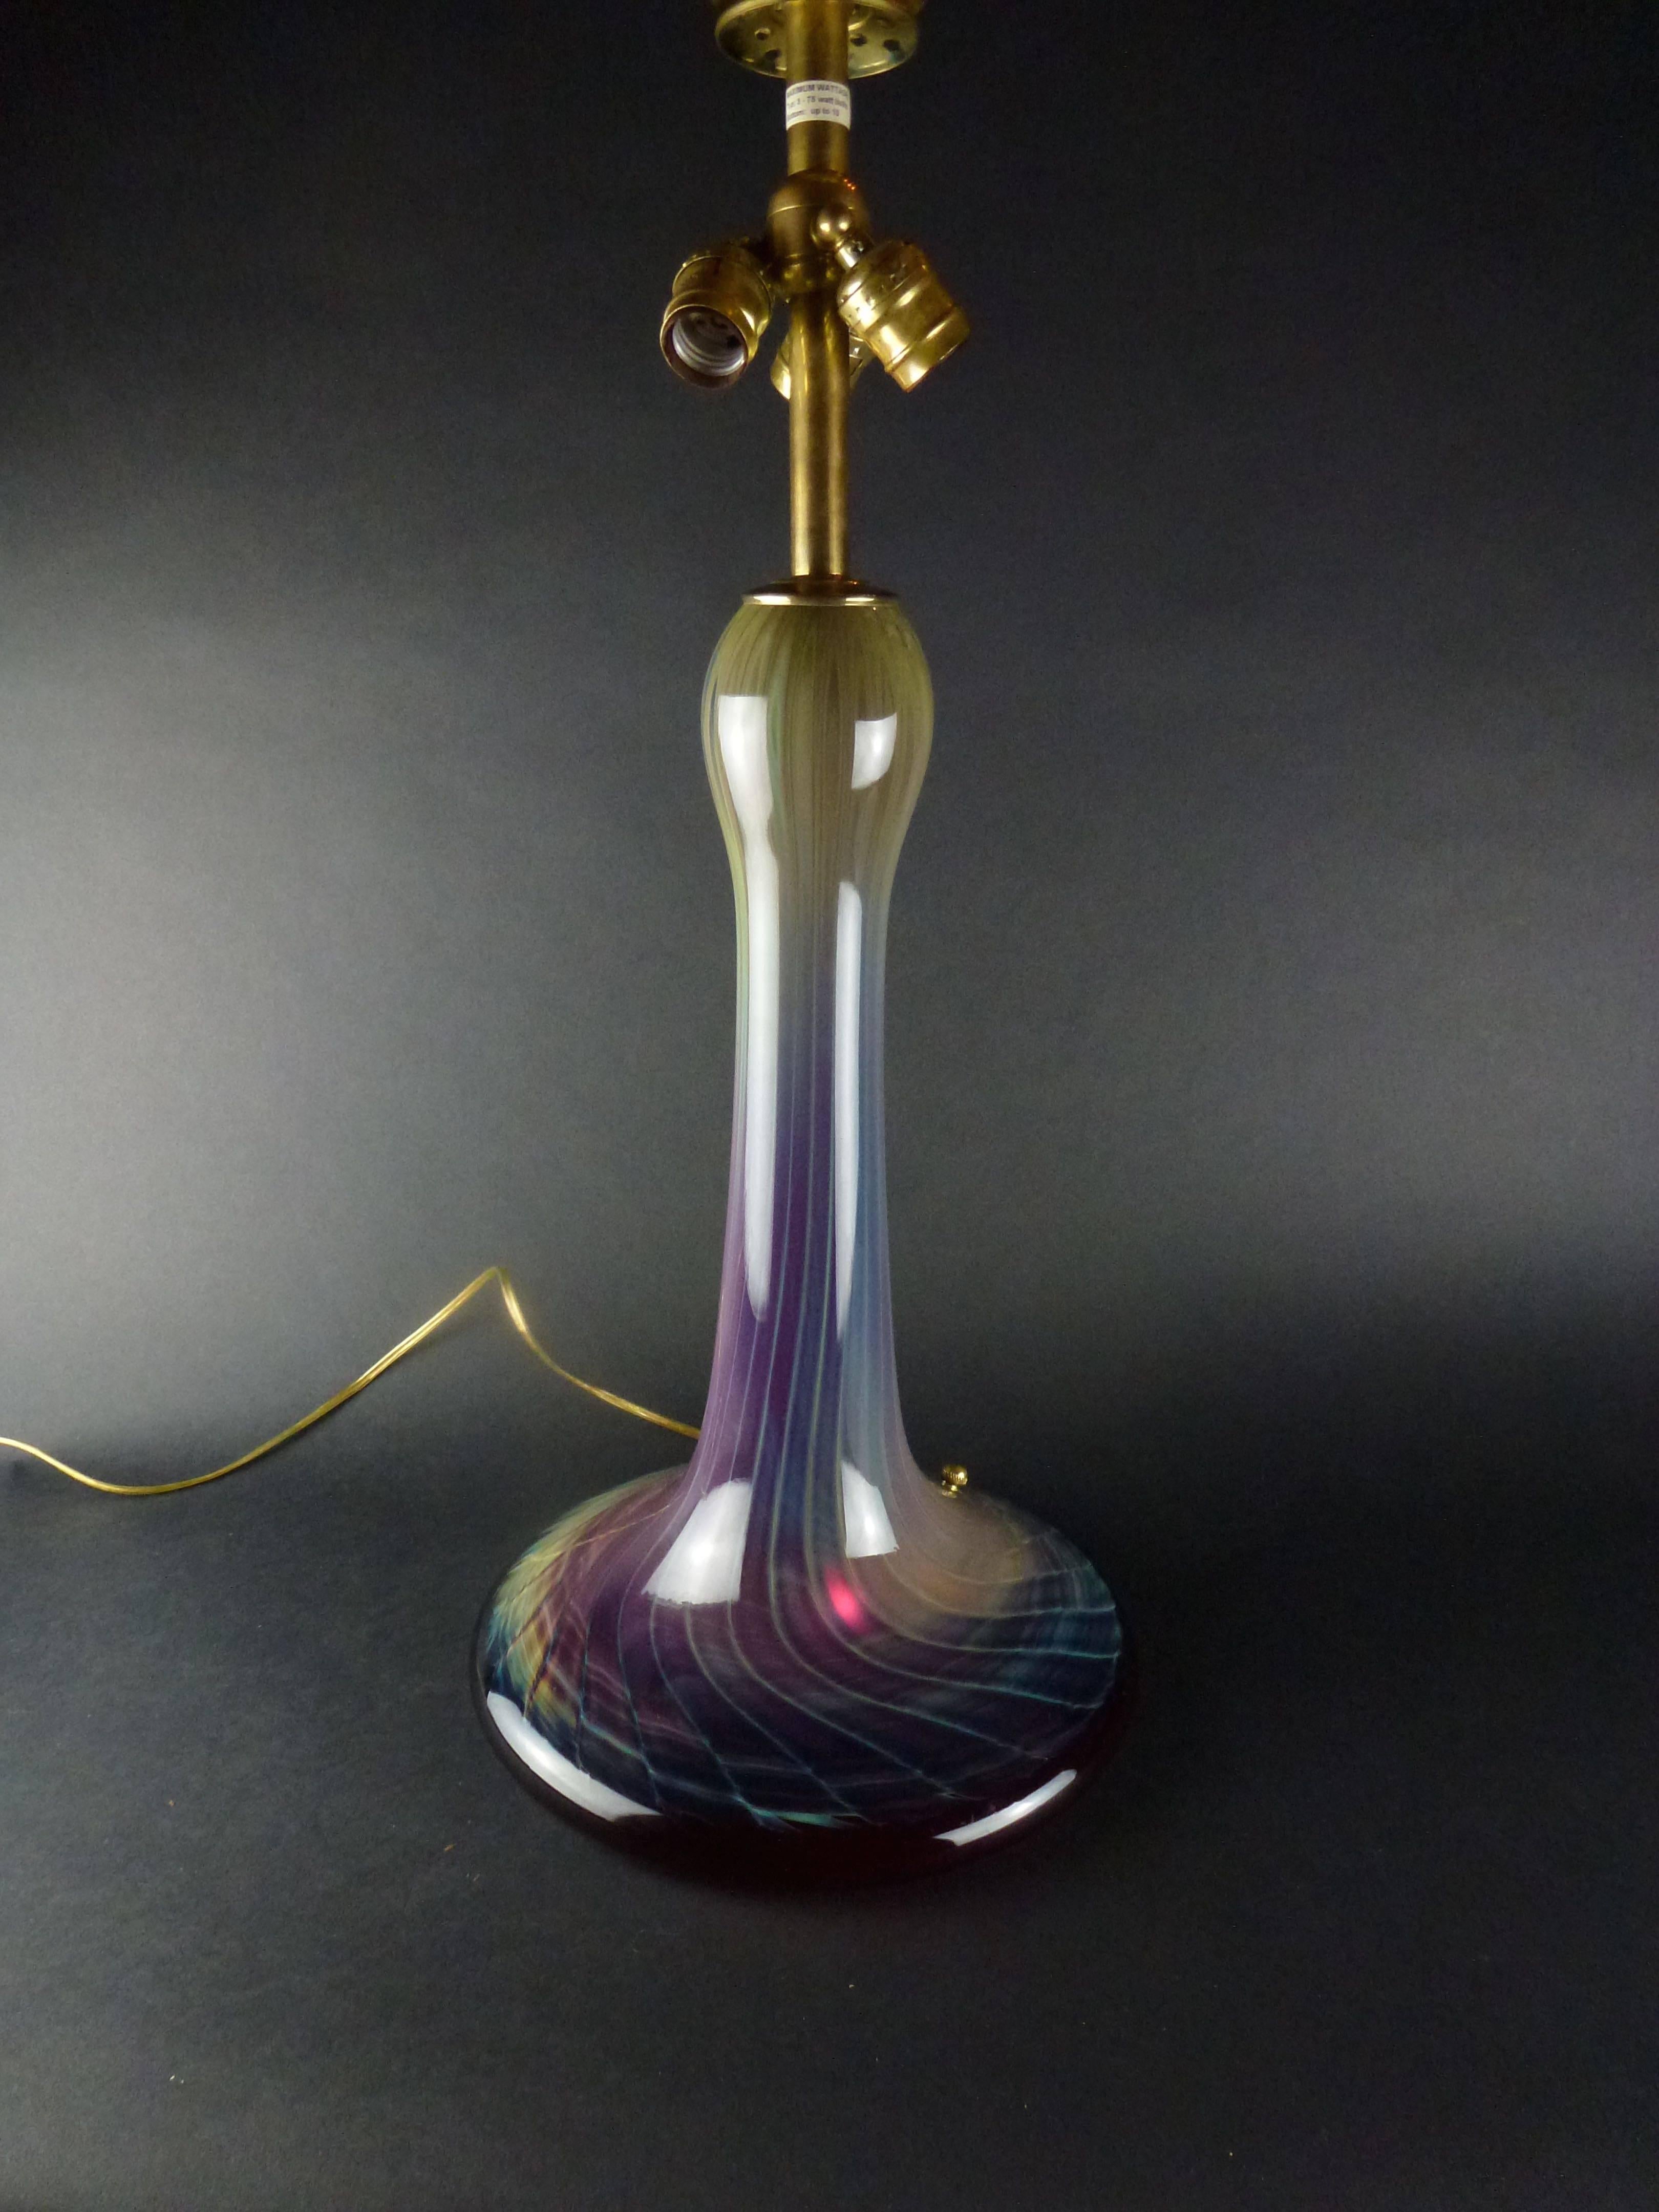 Joe Clearman studio glass blown glass table lamp with blue, purple and red streaks. There are bulbs in the shade and a bulb in the stand. 

Signed Joe Clearman to the base.

Size: 28